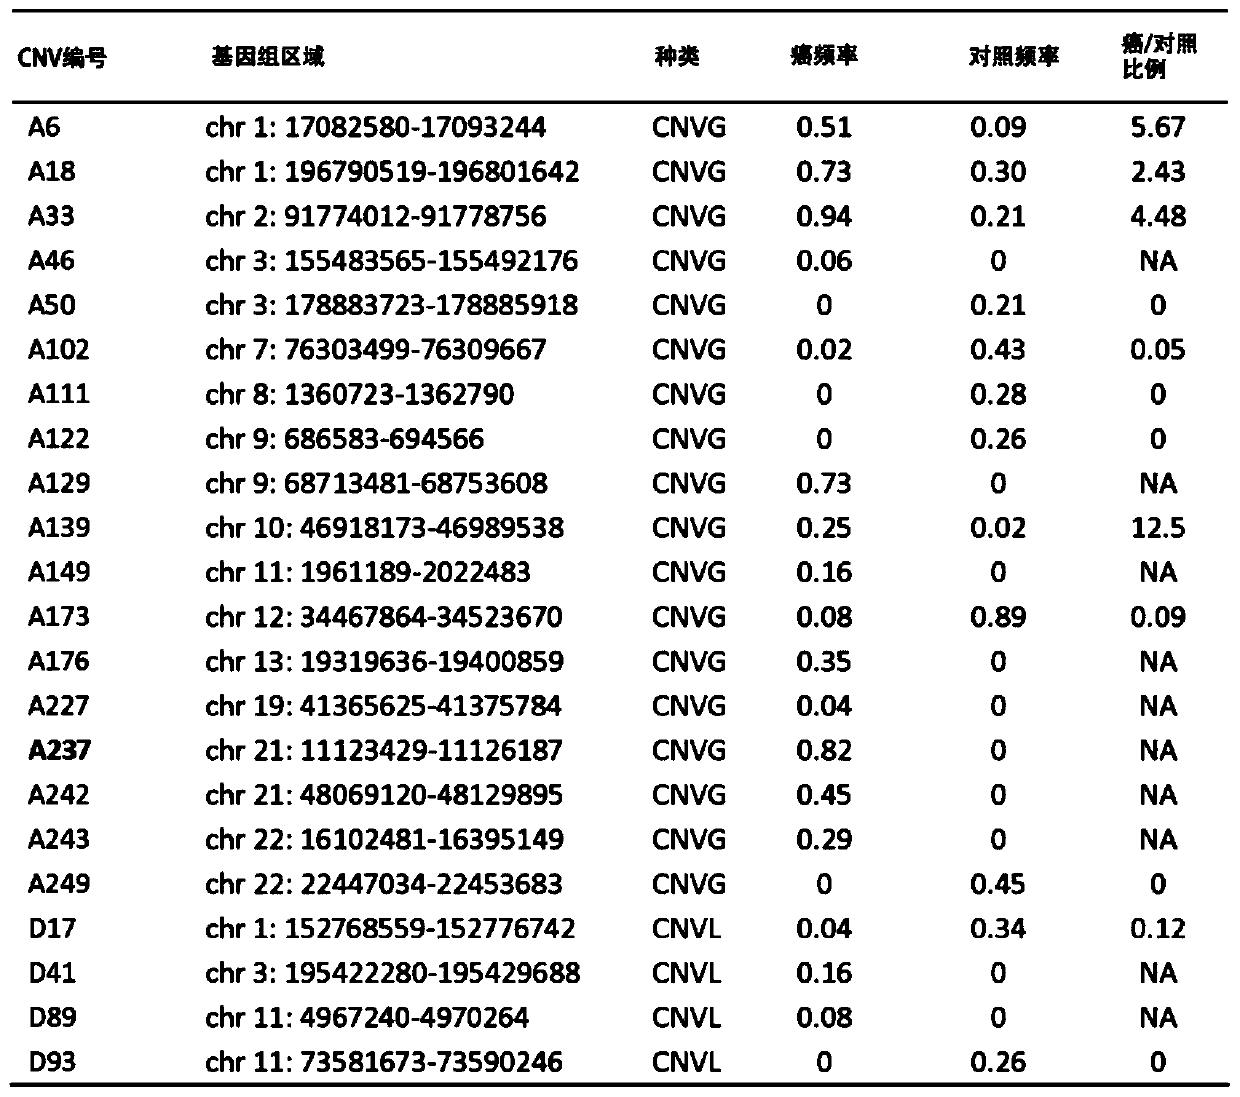 Common copy number variations in the human genome for risk assessment of cancer susceptibility